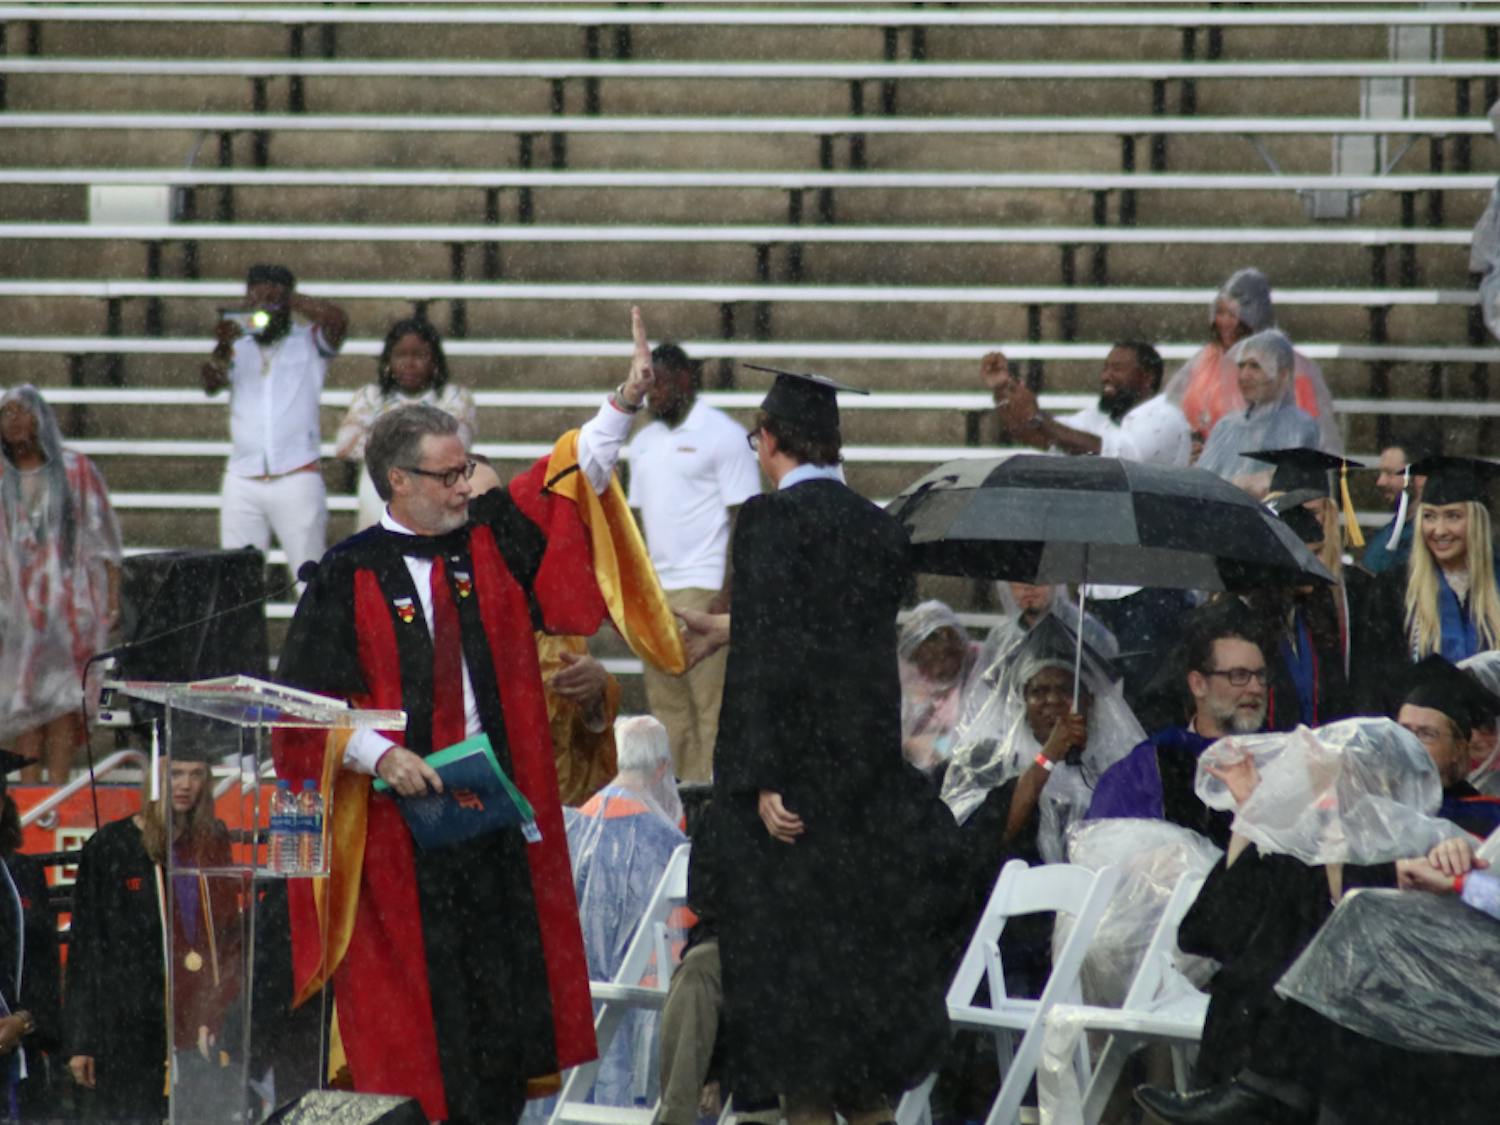 College of Liberal Arts and Sciences Dean, David Richardson, gestures to pause the commencement ceremony. Richardson announced the ceremony would be delayed by 30 minutes, but the ceremony was later moved to an insidehallway of the stadium.